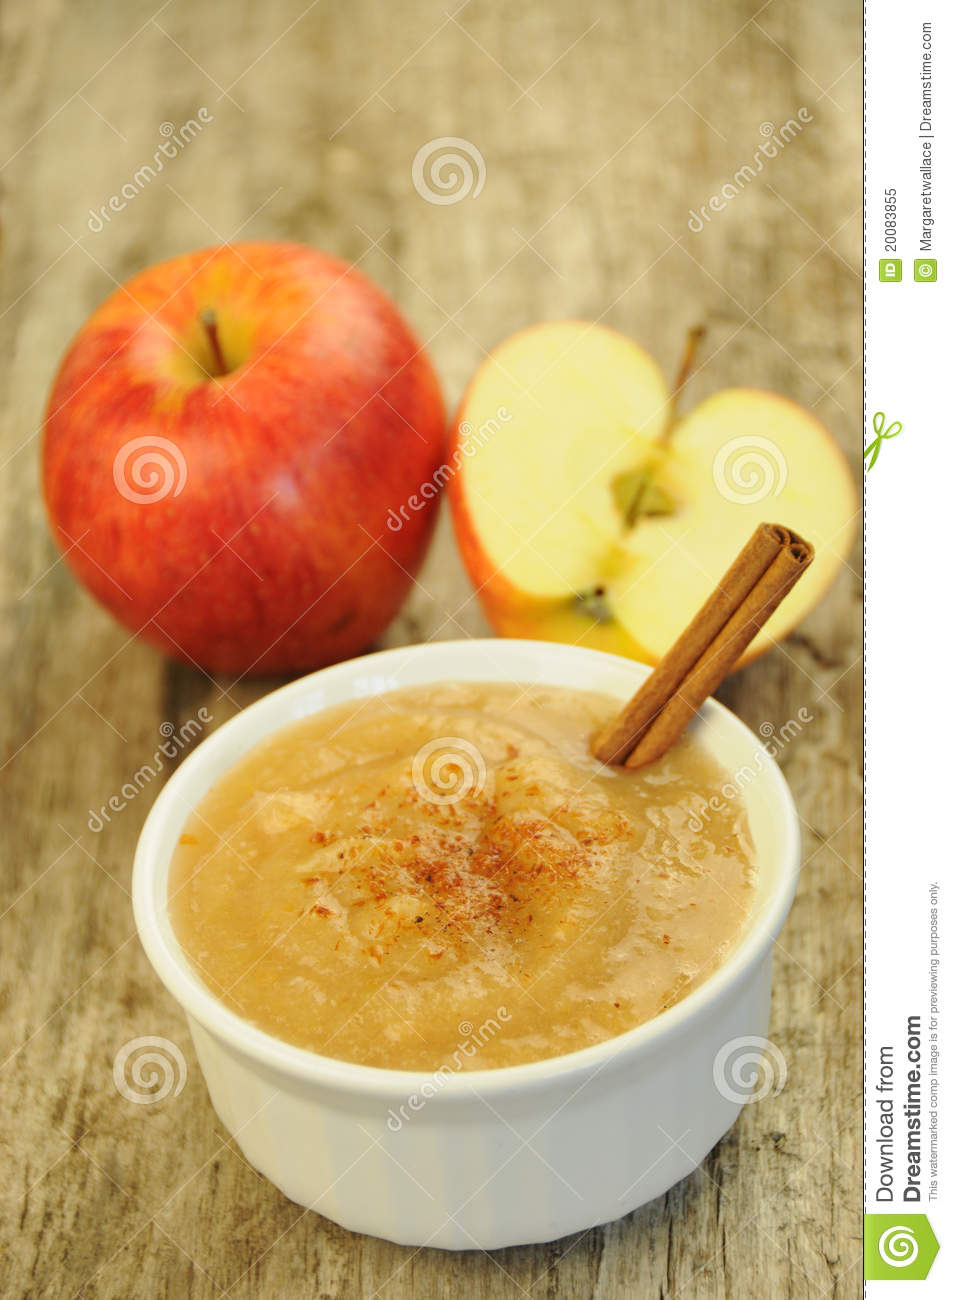 Apple Sauce With A Spoon In A